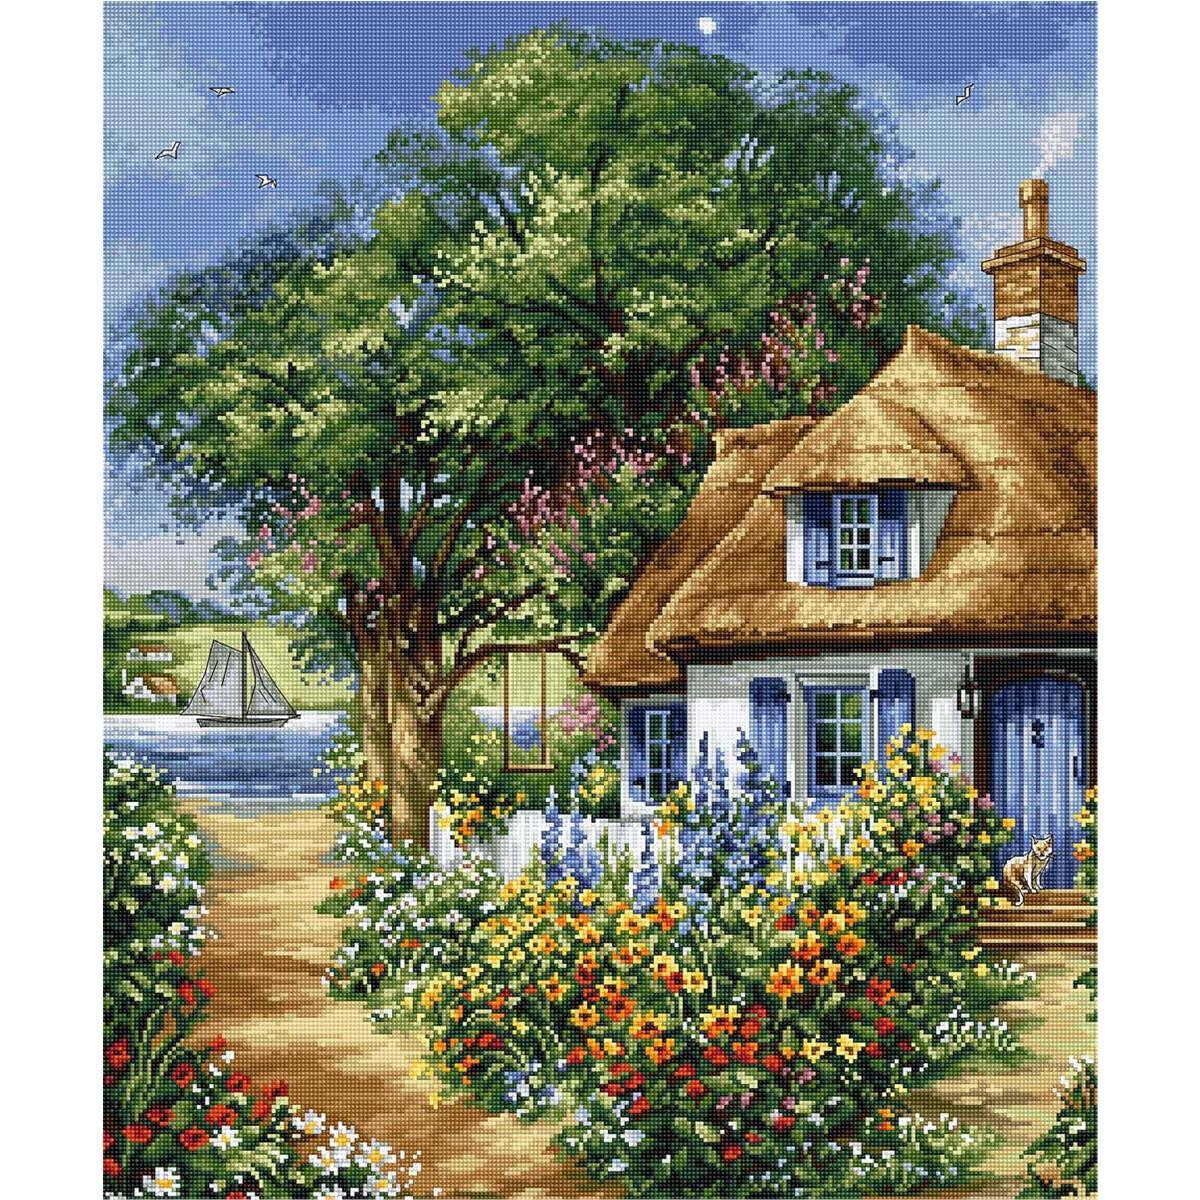 A picturesque landscape scene shows a charming thatched...